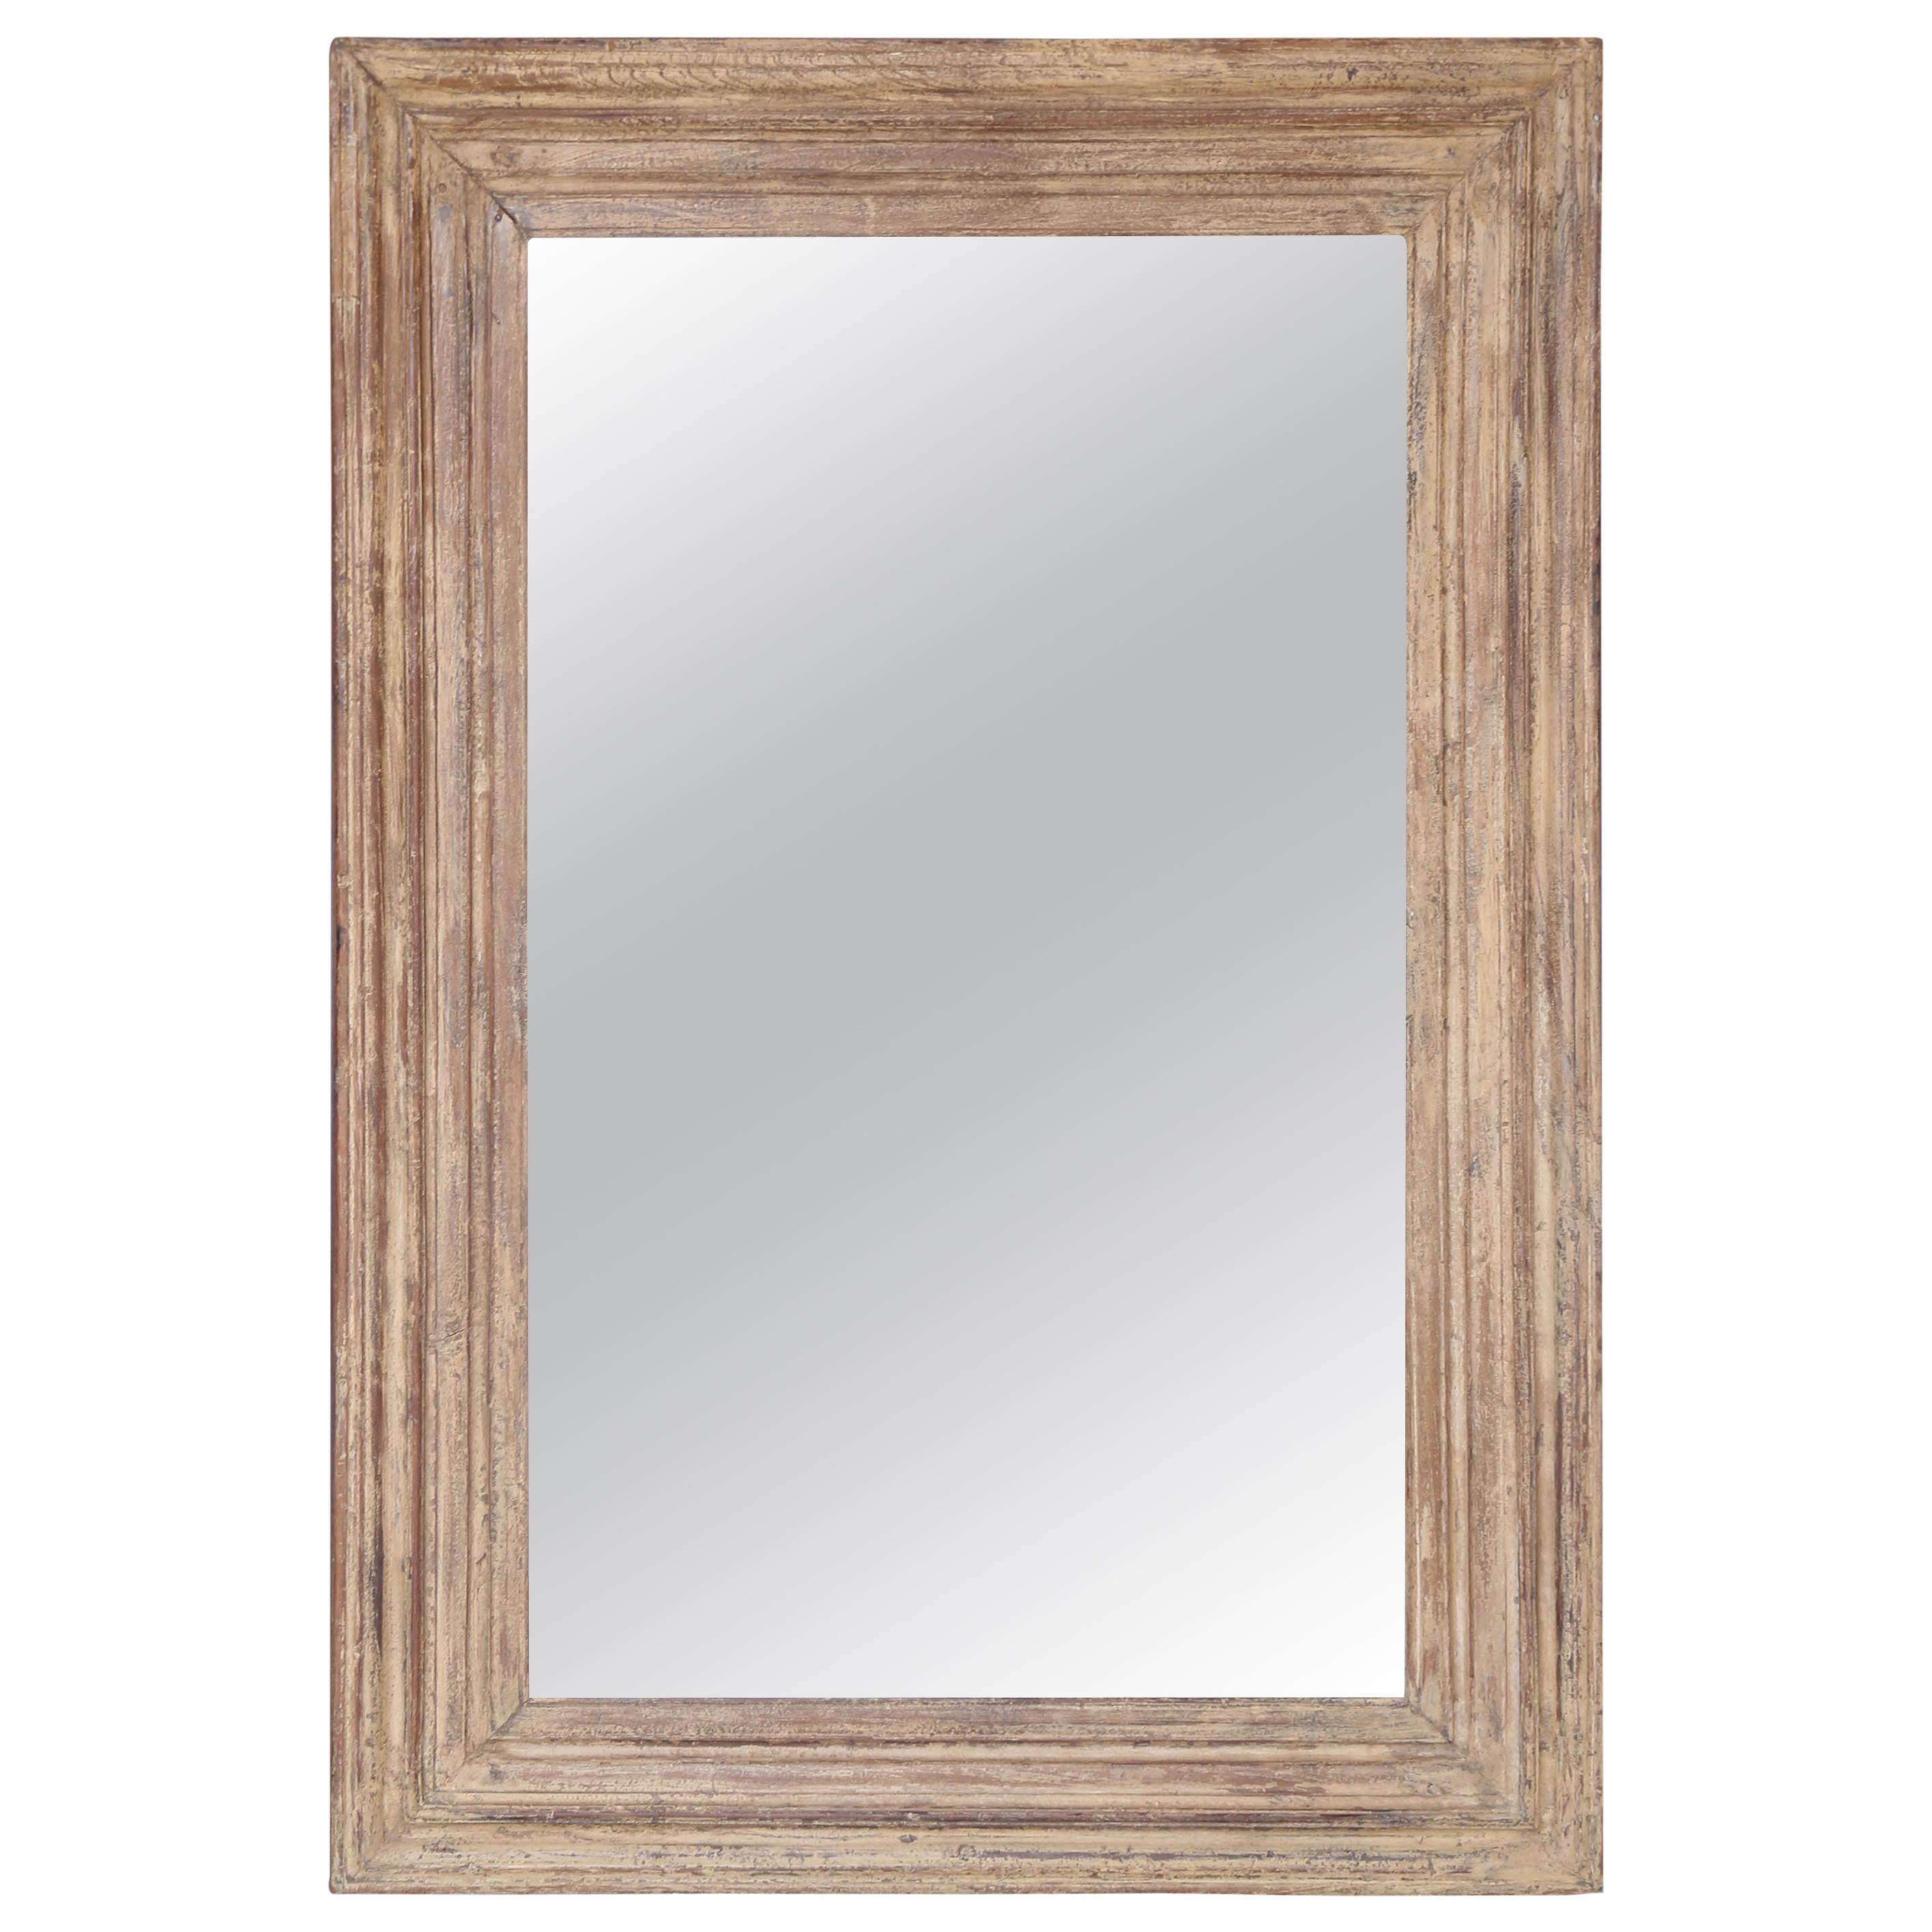 Custom Made Elegant Mirror Frame Comes from 19th Century British Plantation Home For Sale